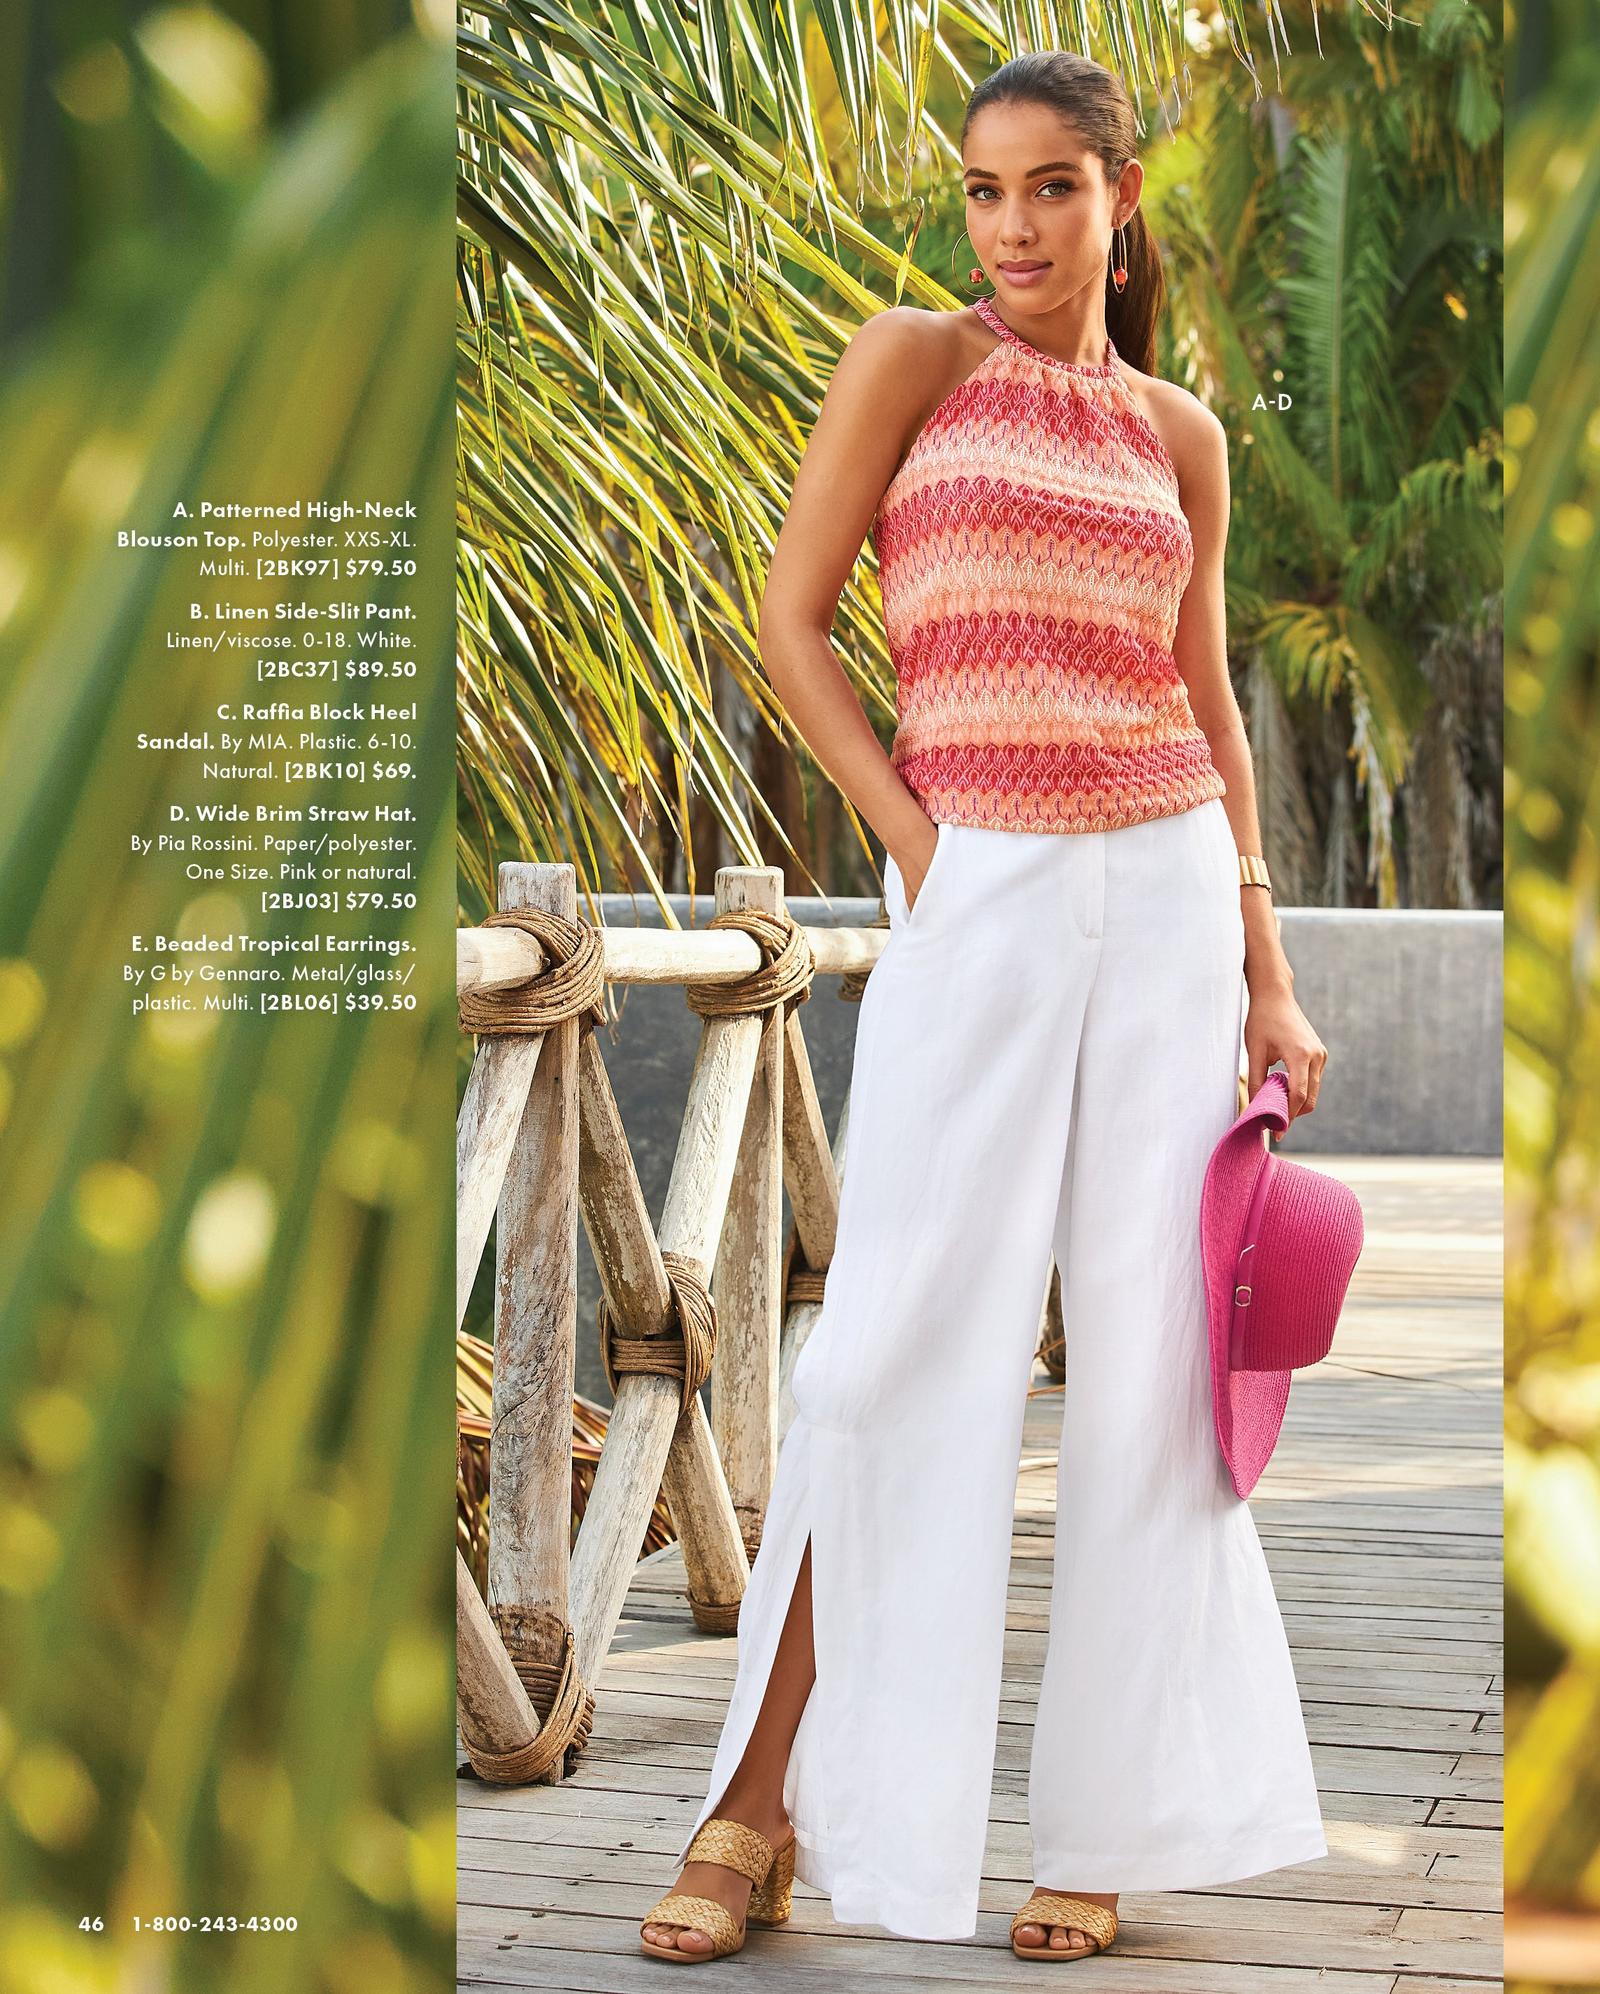 model wearing a multicolored high-neck sleeveless top, white linen side-slit pants, raffia block heels, and holding a hot pink wide brim hat.